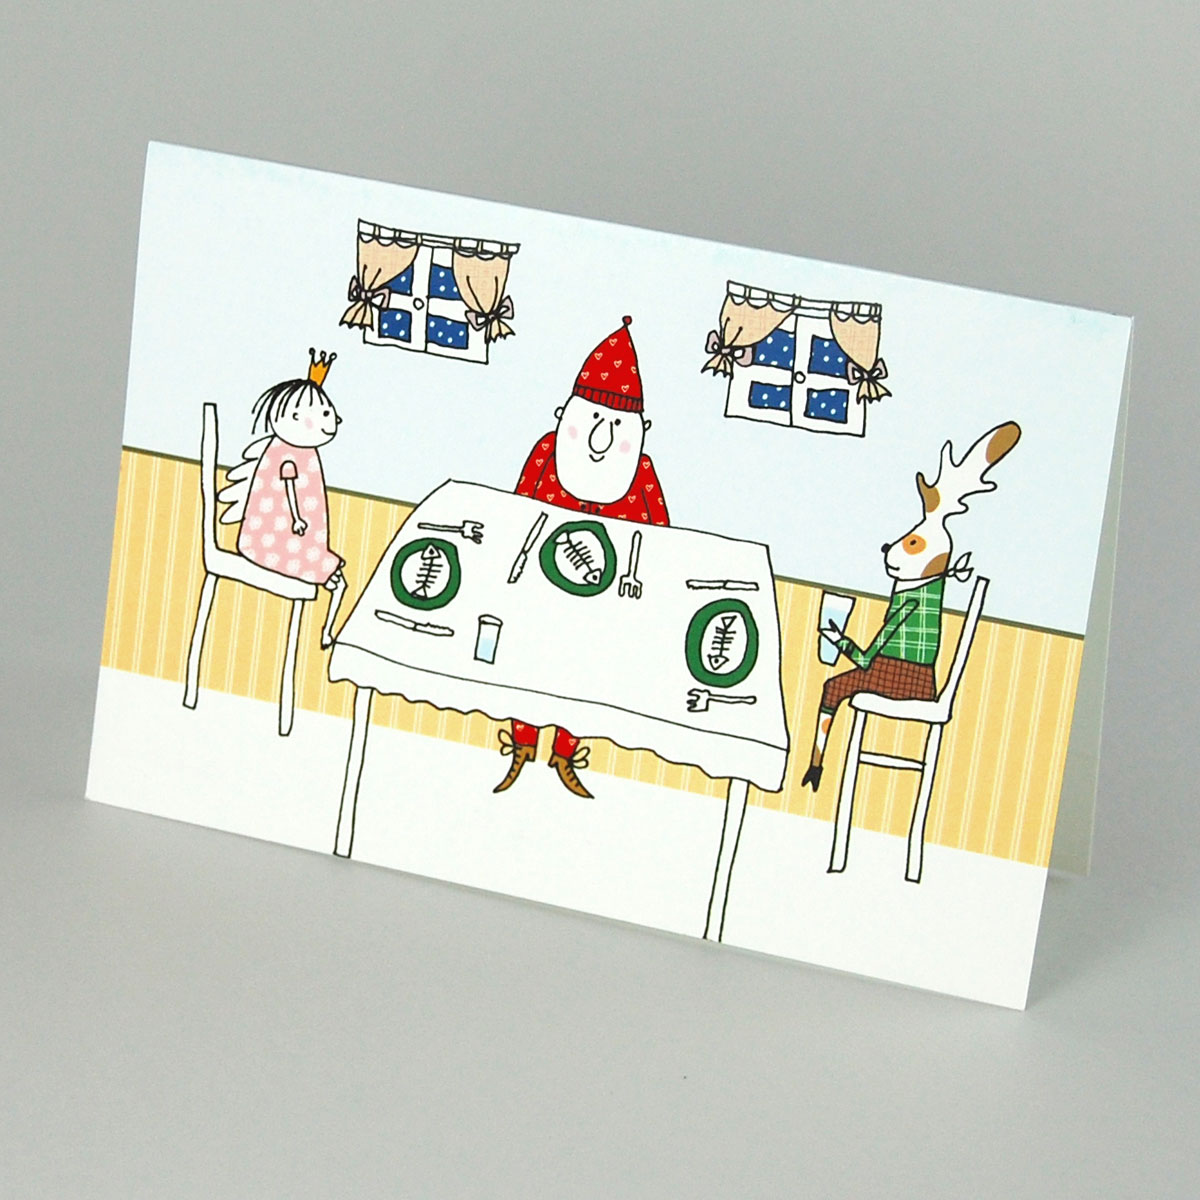 In the Kitchen (Santa Claus, an Angel and Rudolph eating), Corporate Christmas Cards